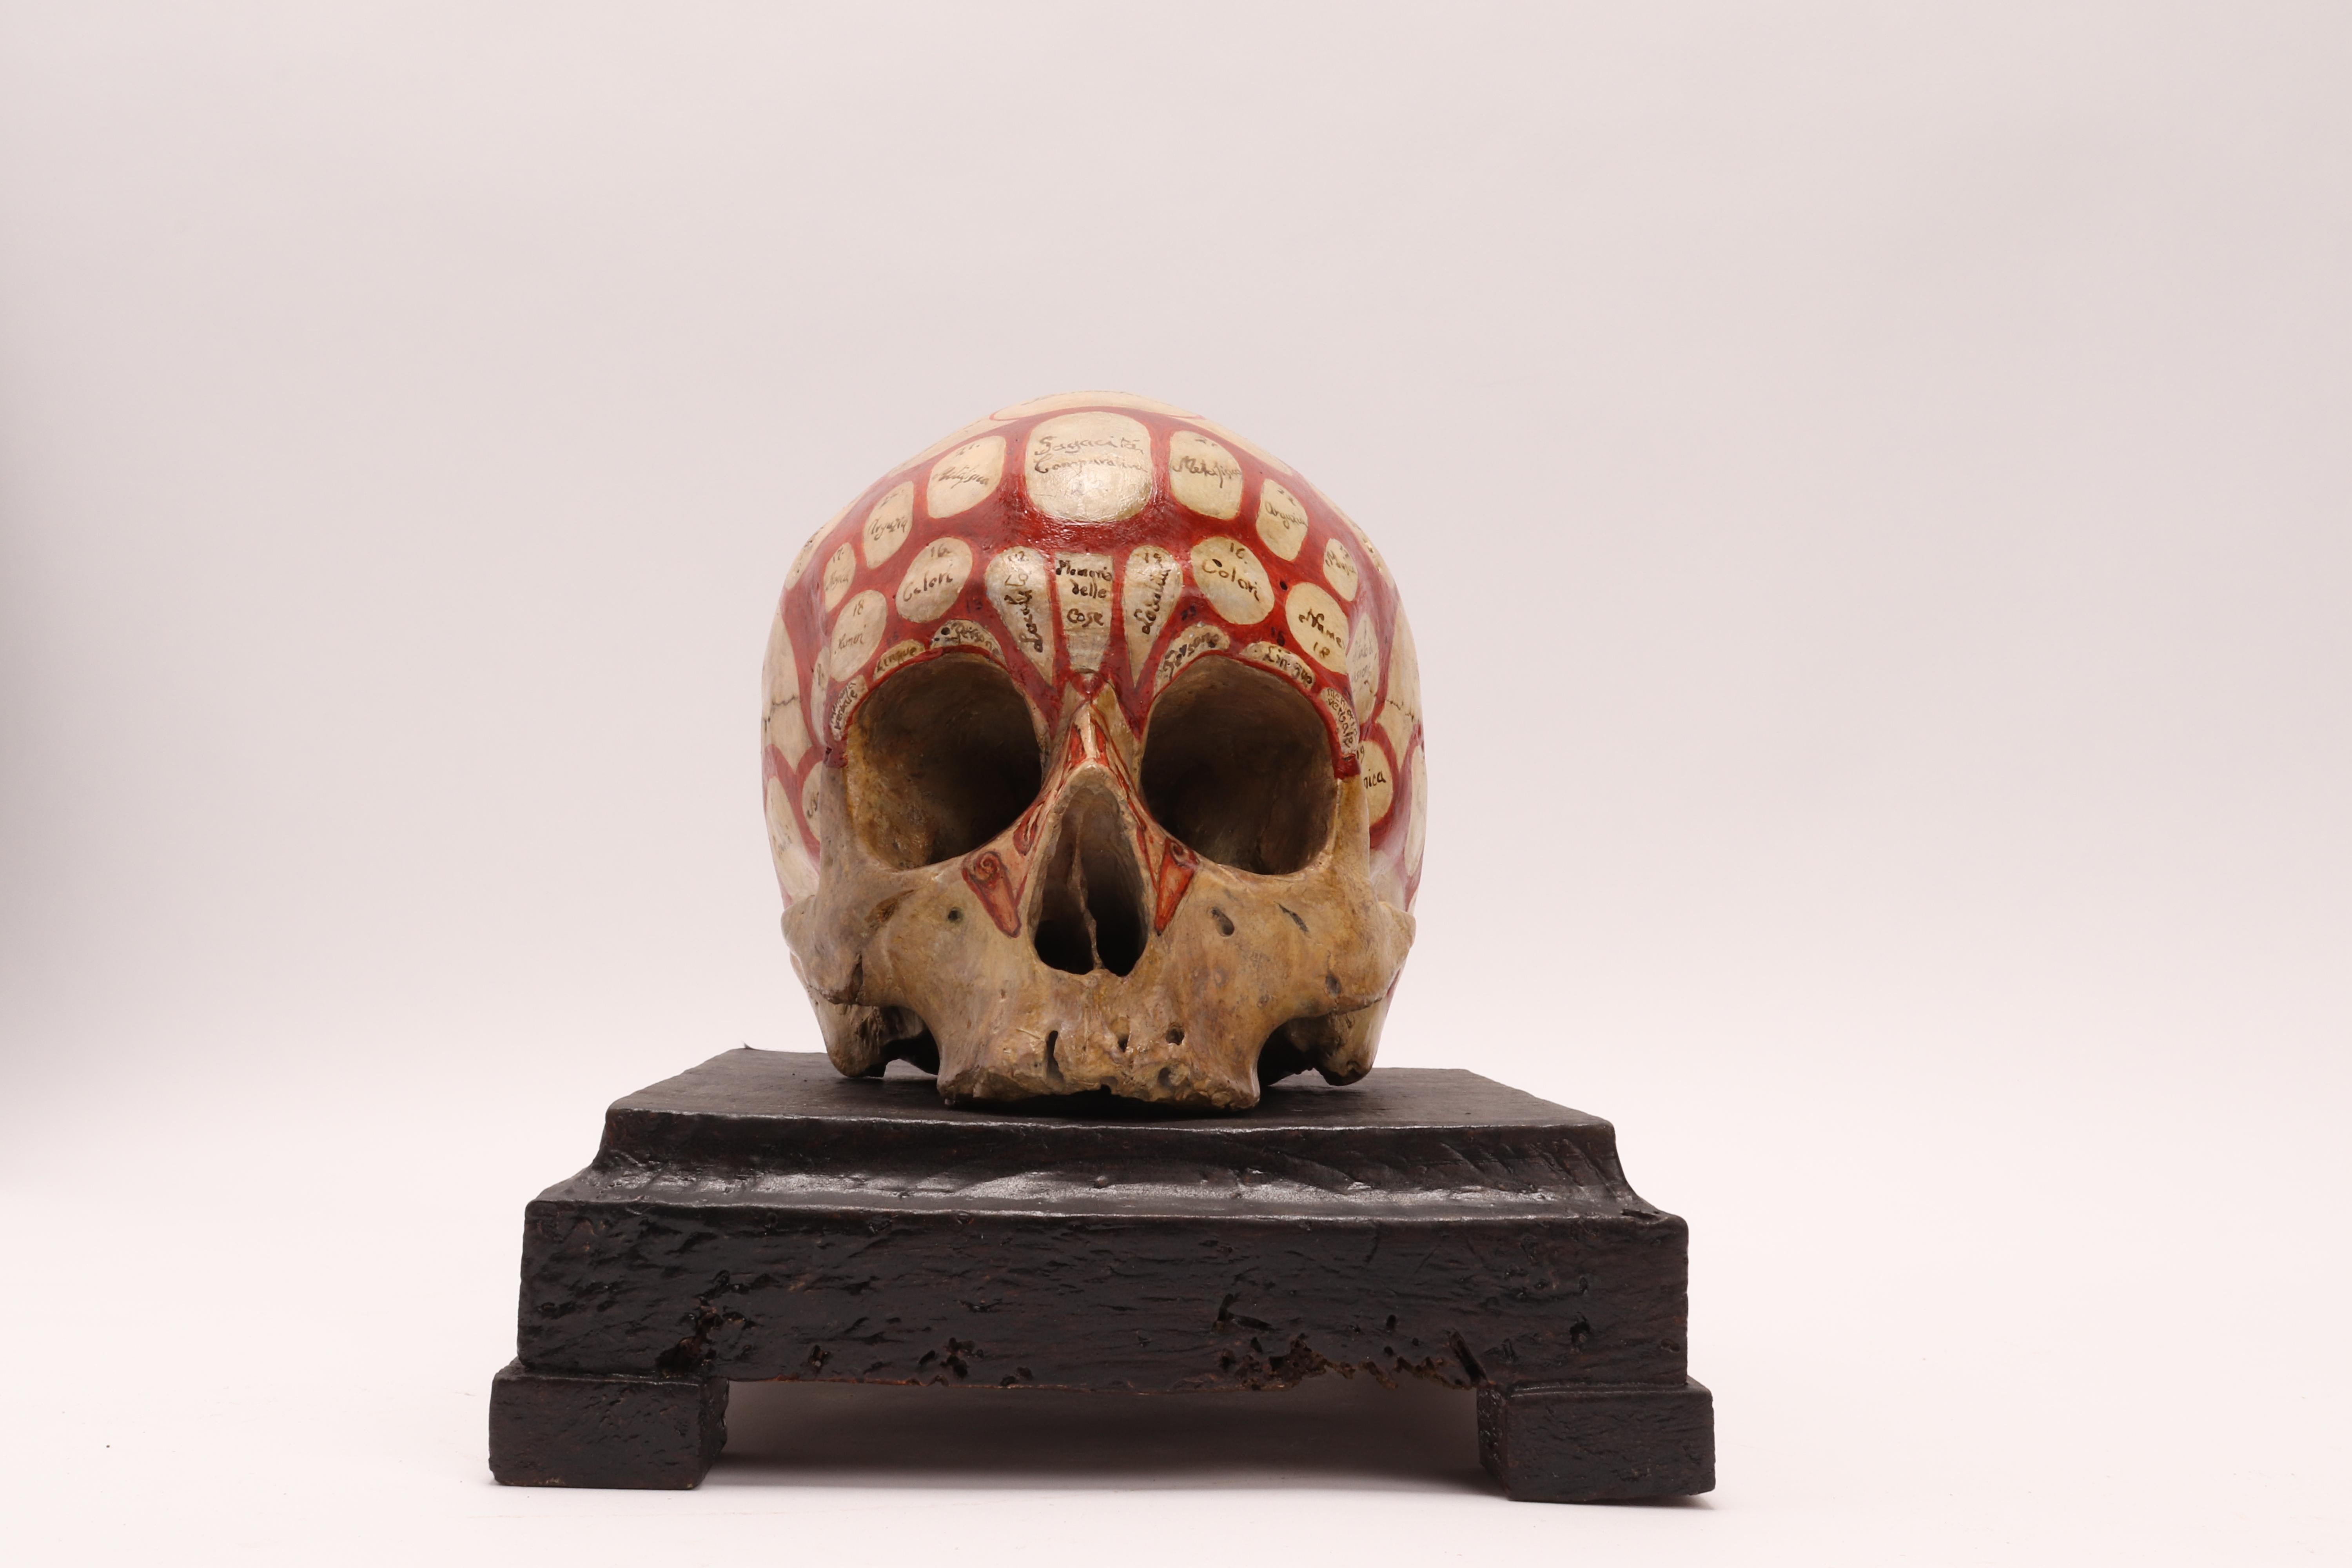 The sculpture is made out of plaster, with a support base made out of ebonized fruitwood. The skull sculpture rests over the base. The sculpture is painted with dark orange color, and shows the phrenological map, with the areas, region of the brain.